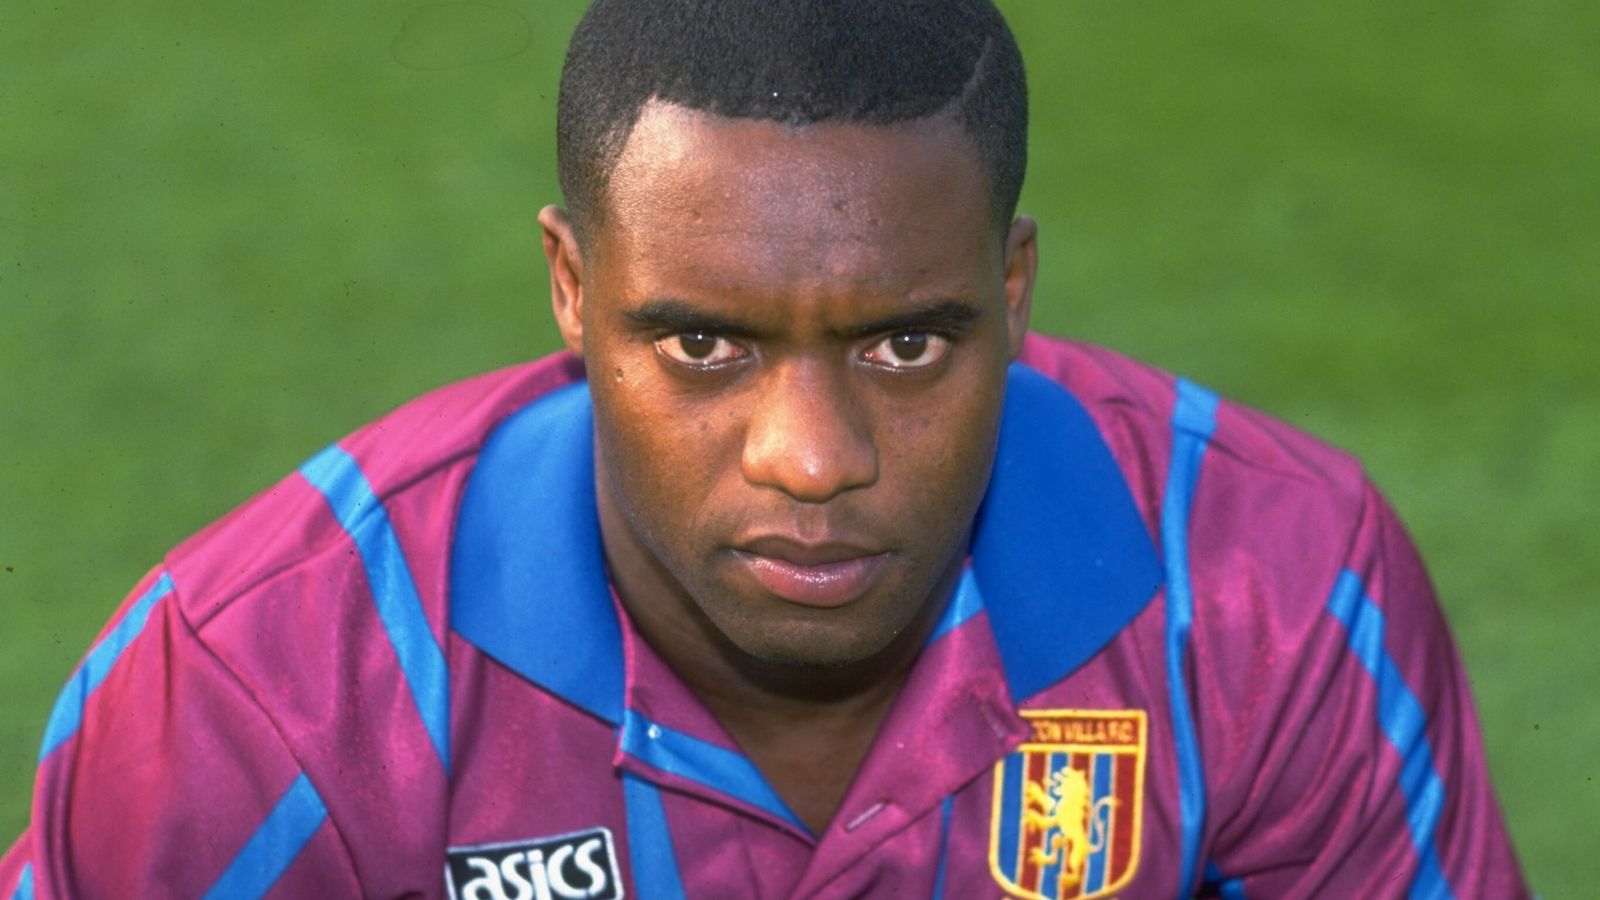 dalian-atkinson-pc-mary-ellen-bettley-smith-cleared-of-assaulting-former-footballer-dalian-atkinson-before-he-died